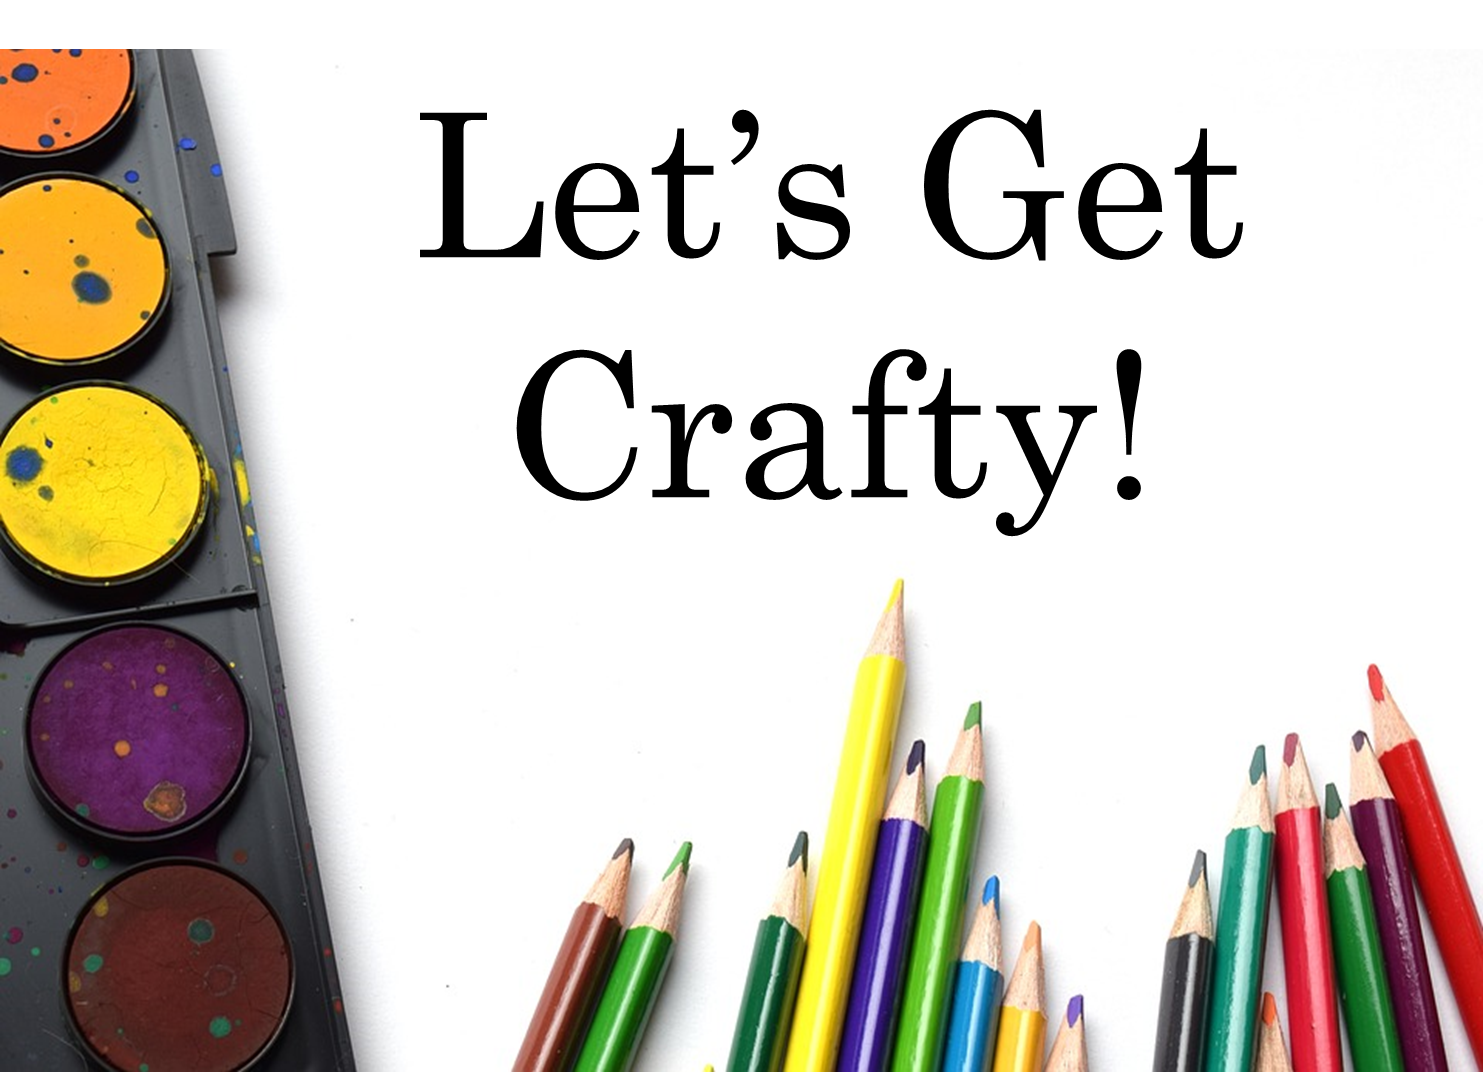 Let's Get Crafty with water color paint set and colored pencils.